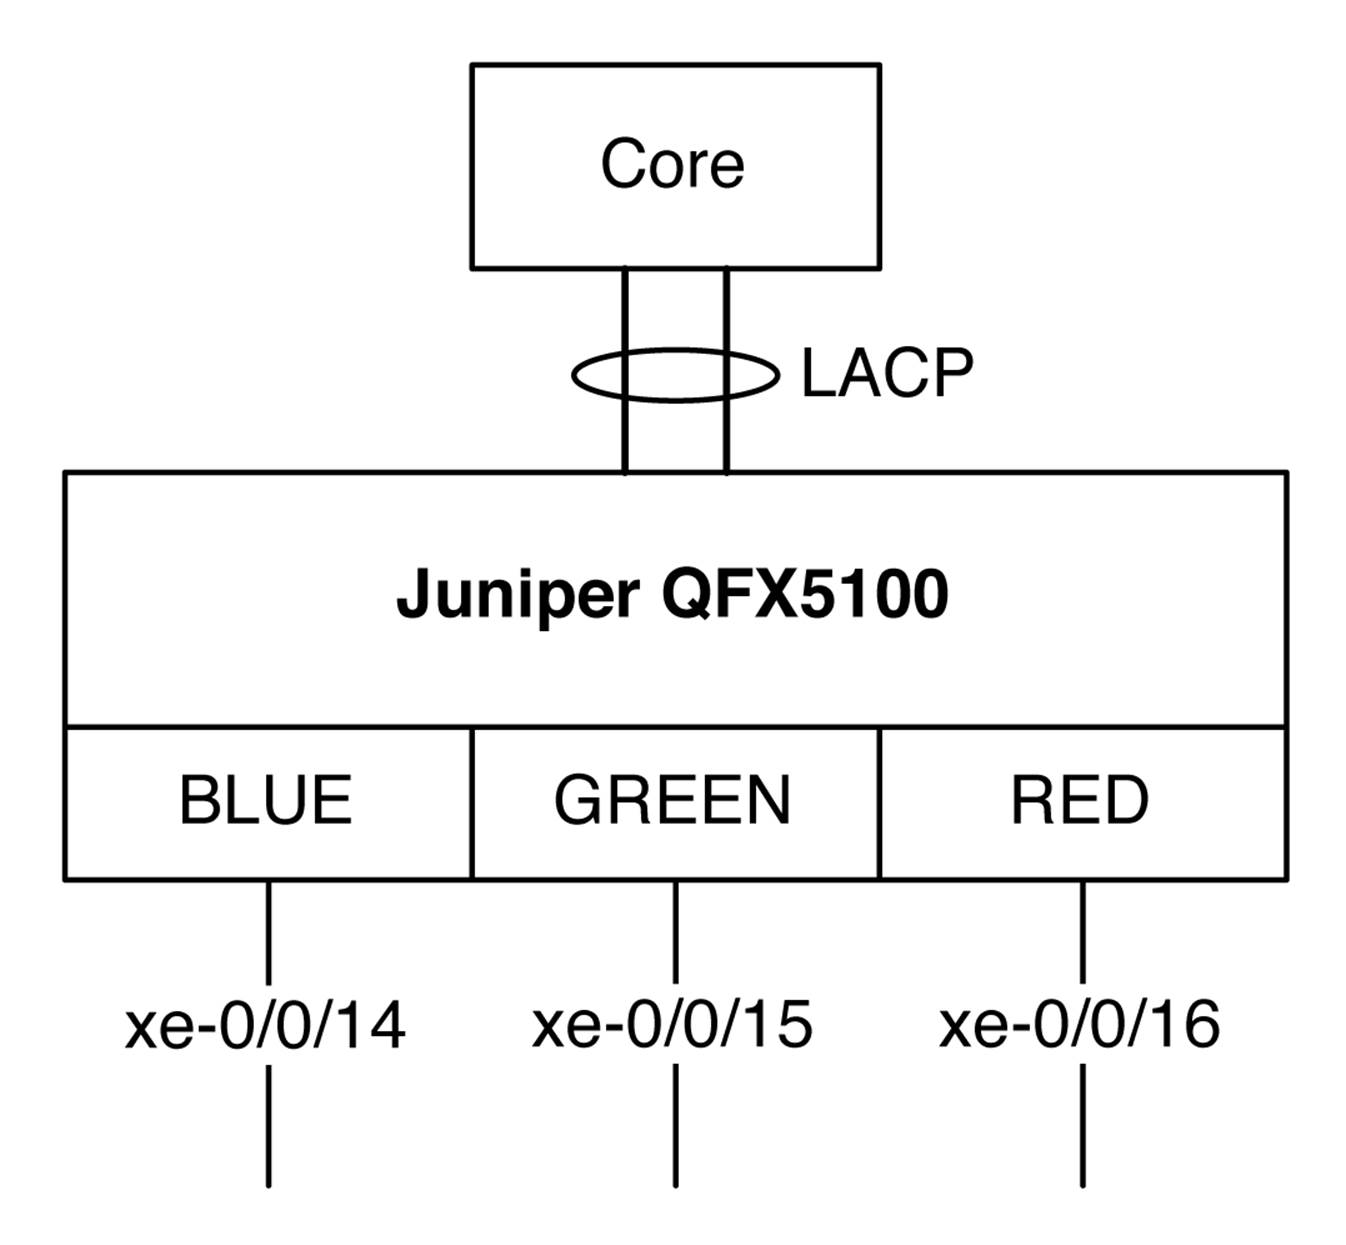 Test topology with the Juniper QFX5100 switch and Puppet Master manifest